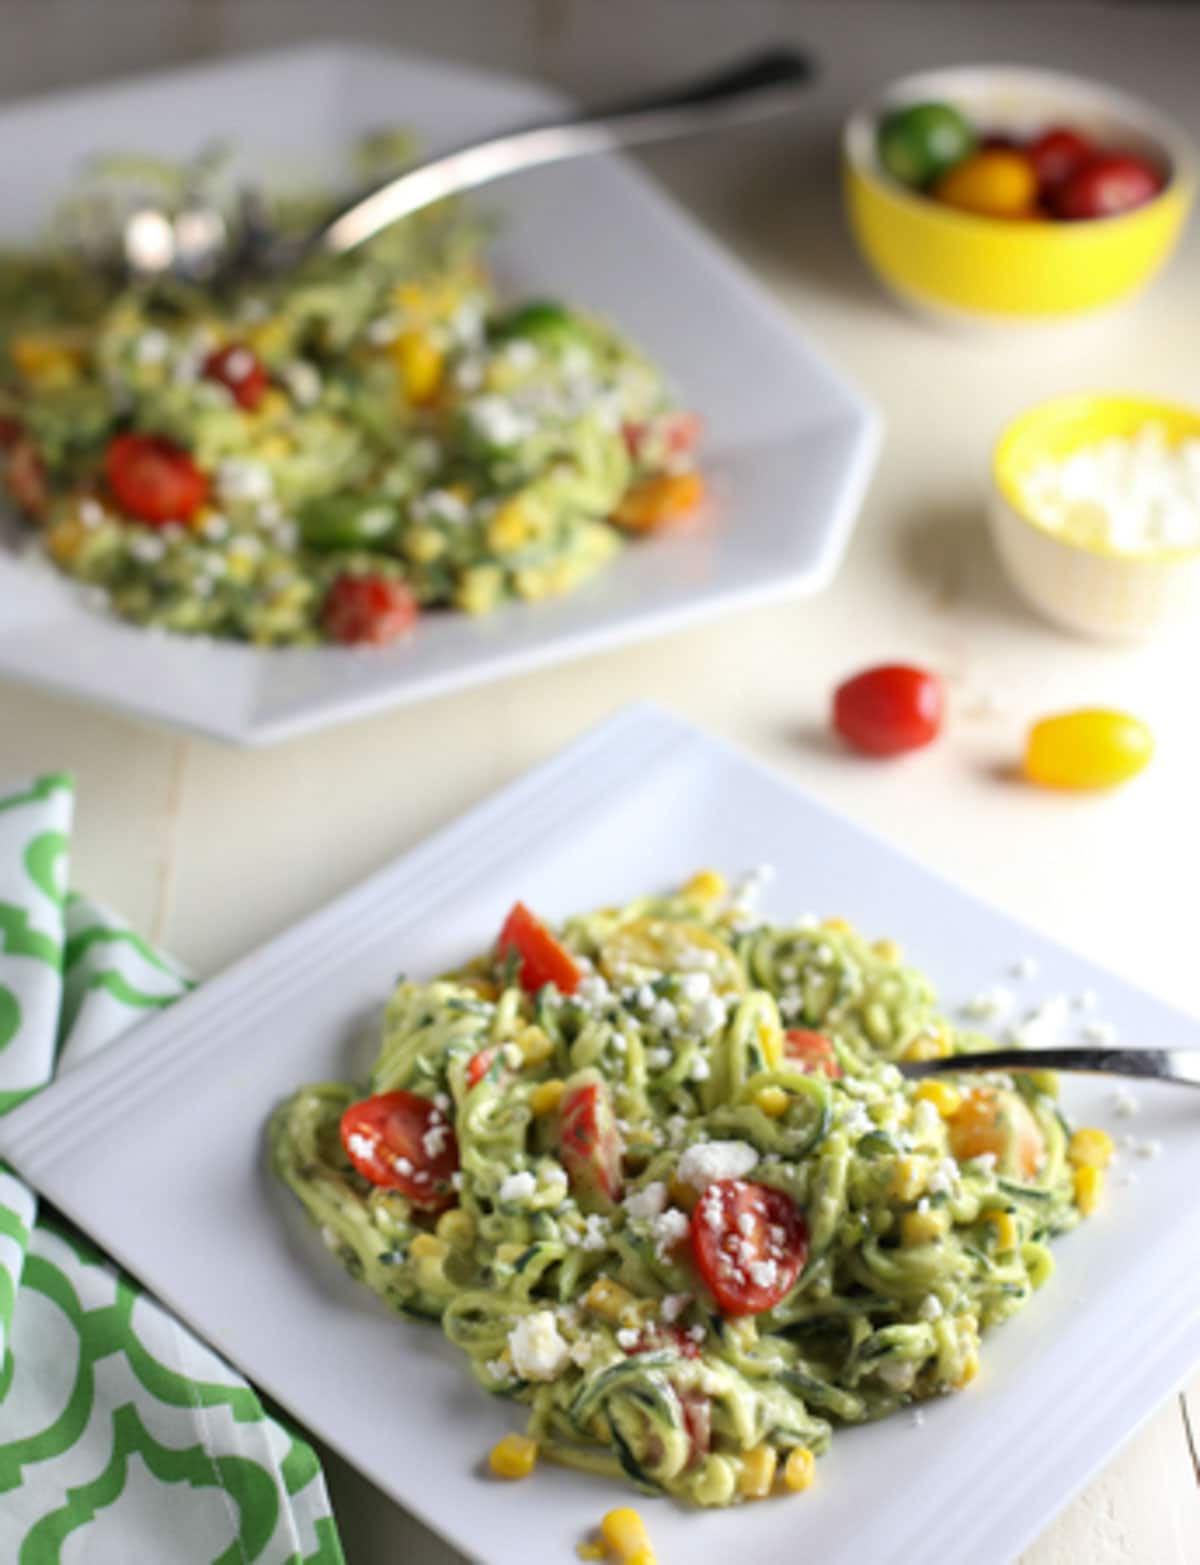 Zucchini Noodle Salad with Tomatoes, Goat Cheese, Corn & Avocado Sauce | WorldofPastabilities.com | Healthy, fresh, and delicious noodles that will convince even the kids it is pasta! The avocado sauce is the star...perfect side for any grilled meats this spring and summer!